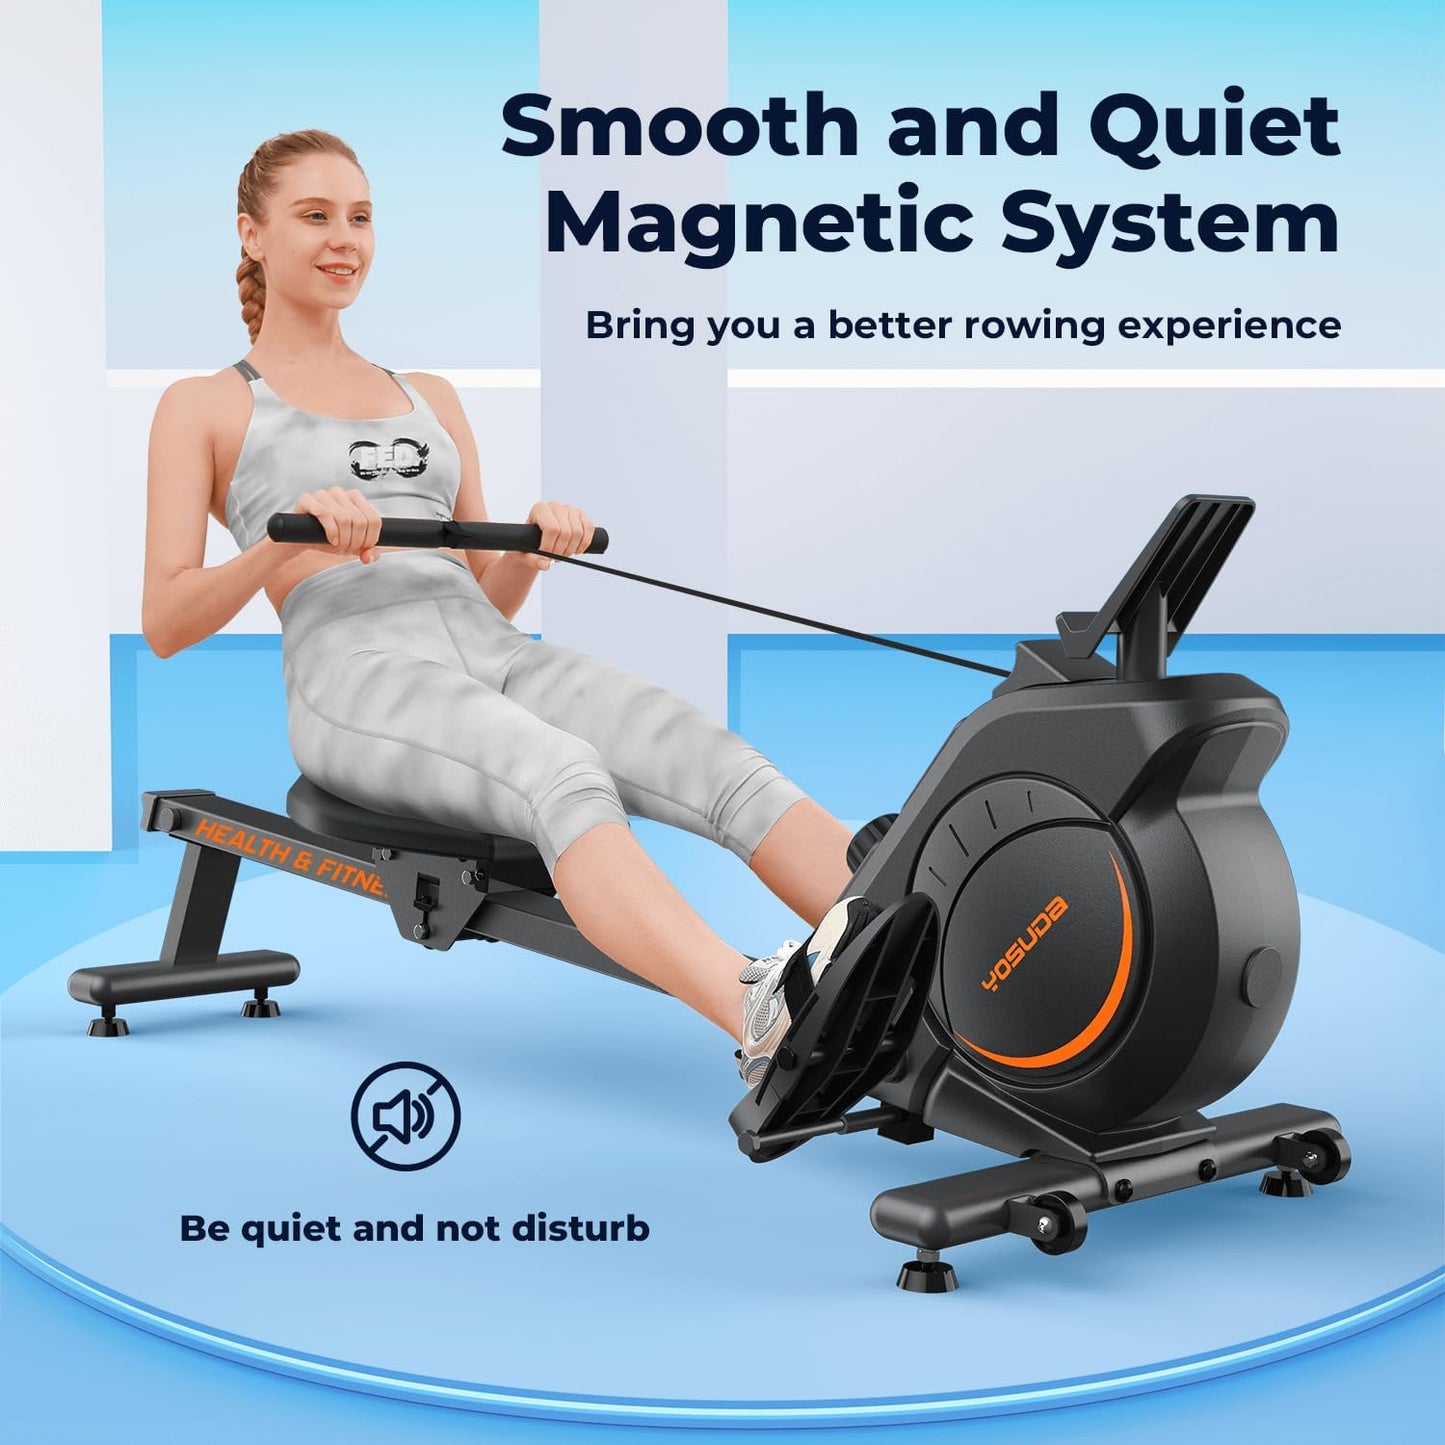 Magnetic/Water Rowing Machine 350 LB Weight Capacity - Foldable Rower for Home Use with Bluetooth, App Supported, Tablet Holder and Comfortable Seat Cushion